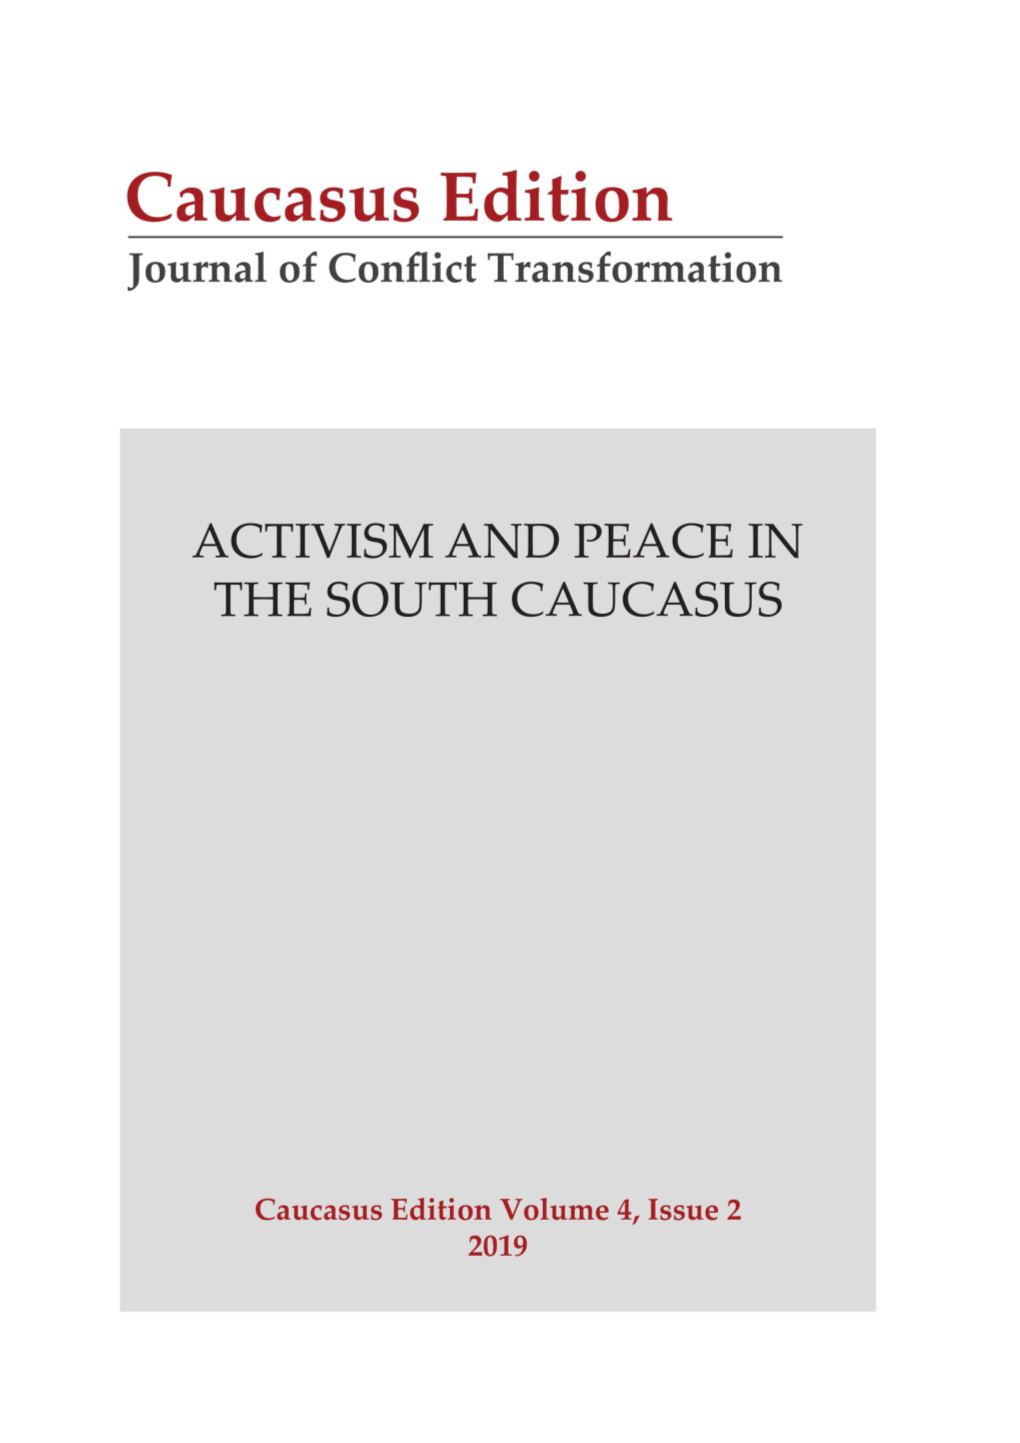 Activism and Peace in the South Caucasus